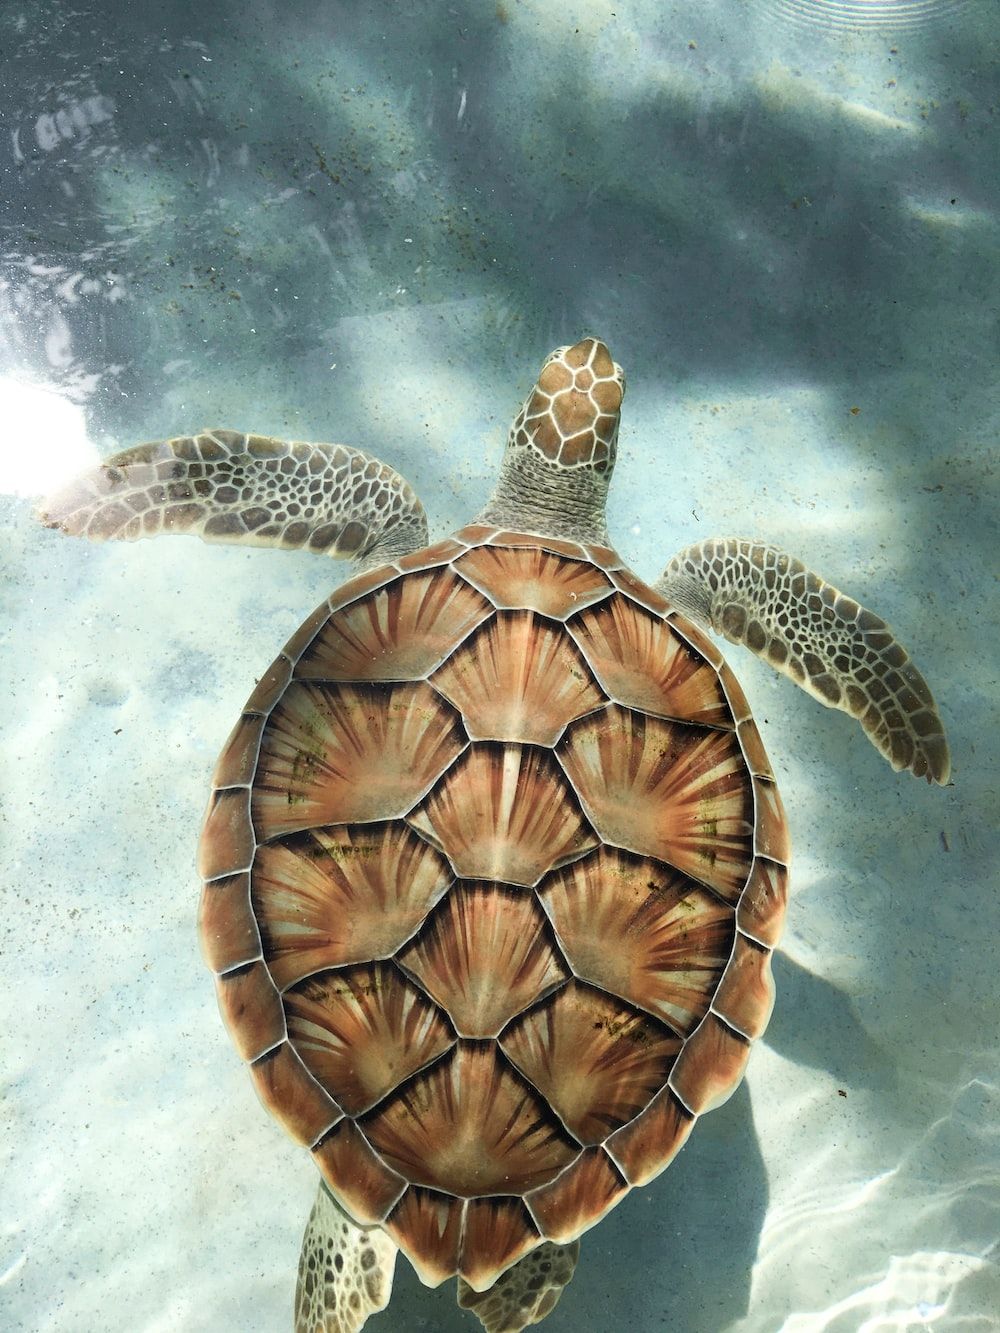 A turtle swimming in the water - Sea turtle, turtle